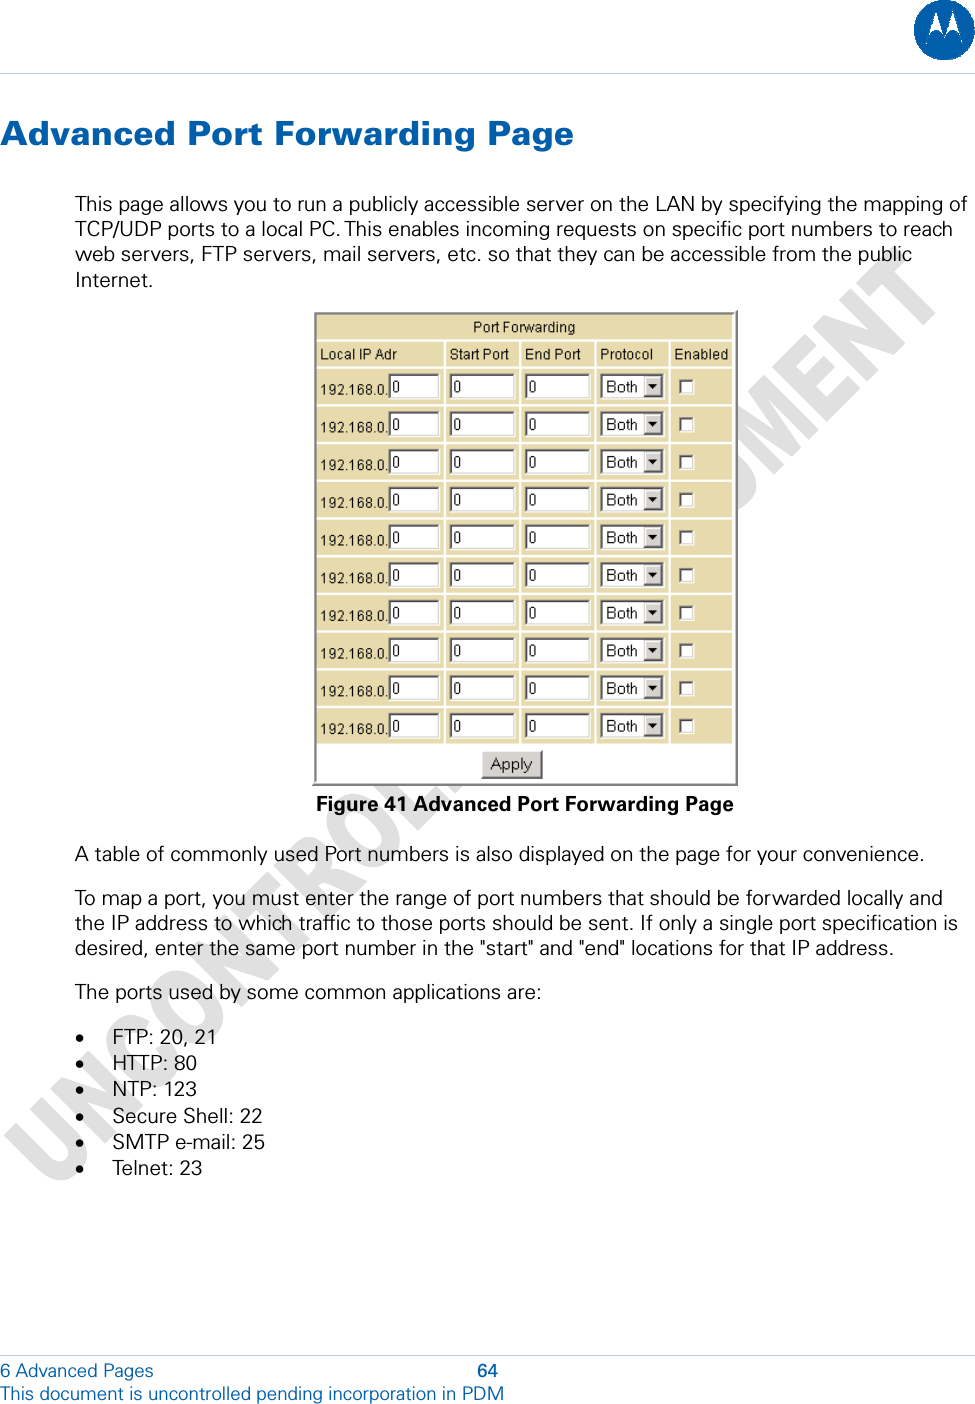  Advanced Port Forwarding Page This page allows you to run a publicly accessible server on the LAN by specifying the mapping of TCP/UDP ports to a local PC. This enables incoming requests on specific port numbers to reach web servers, FTP servers, mail servers, etc. so that they can be accessible from the public Internet.  Figure 41 Advanced Port Forwarding Page A table of commonly used Port numbers is also displayed on the page for your convenience. To map a port, you must enter the range of port numbers that should be forwarded locally and the IP address to which traffic to those ports should be sent. If only a single port specification is desired, enter the same port number in the &quot;start&quot; and &quot;end&quot; locations for that IP address. The ports used by some common applications are: • FTP: 20, 21 • HTTP: 80 • NTP: 123 • Secure Shell: 22 • SMTP e-mail: 25 • Telnet: 23 6 Advanced Pages  64 This document is uncontrolled pending incorporation in PDM  